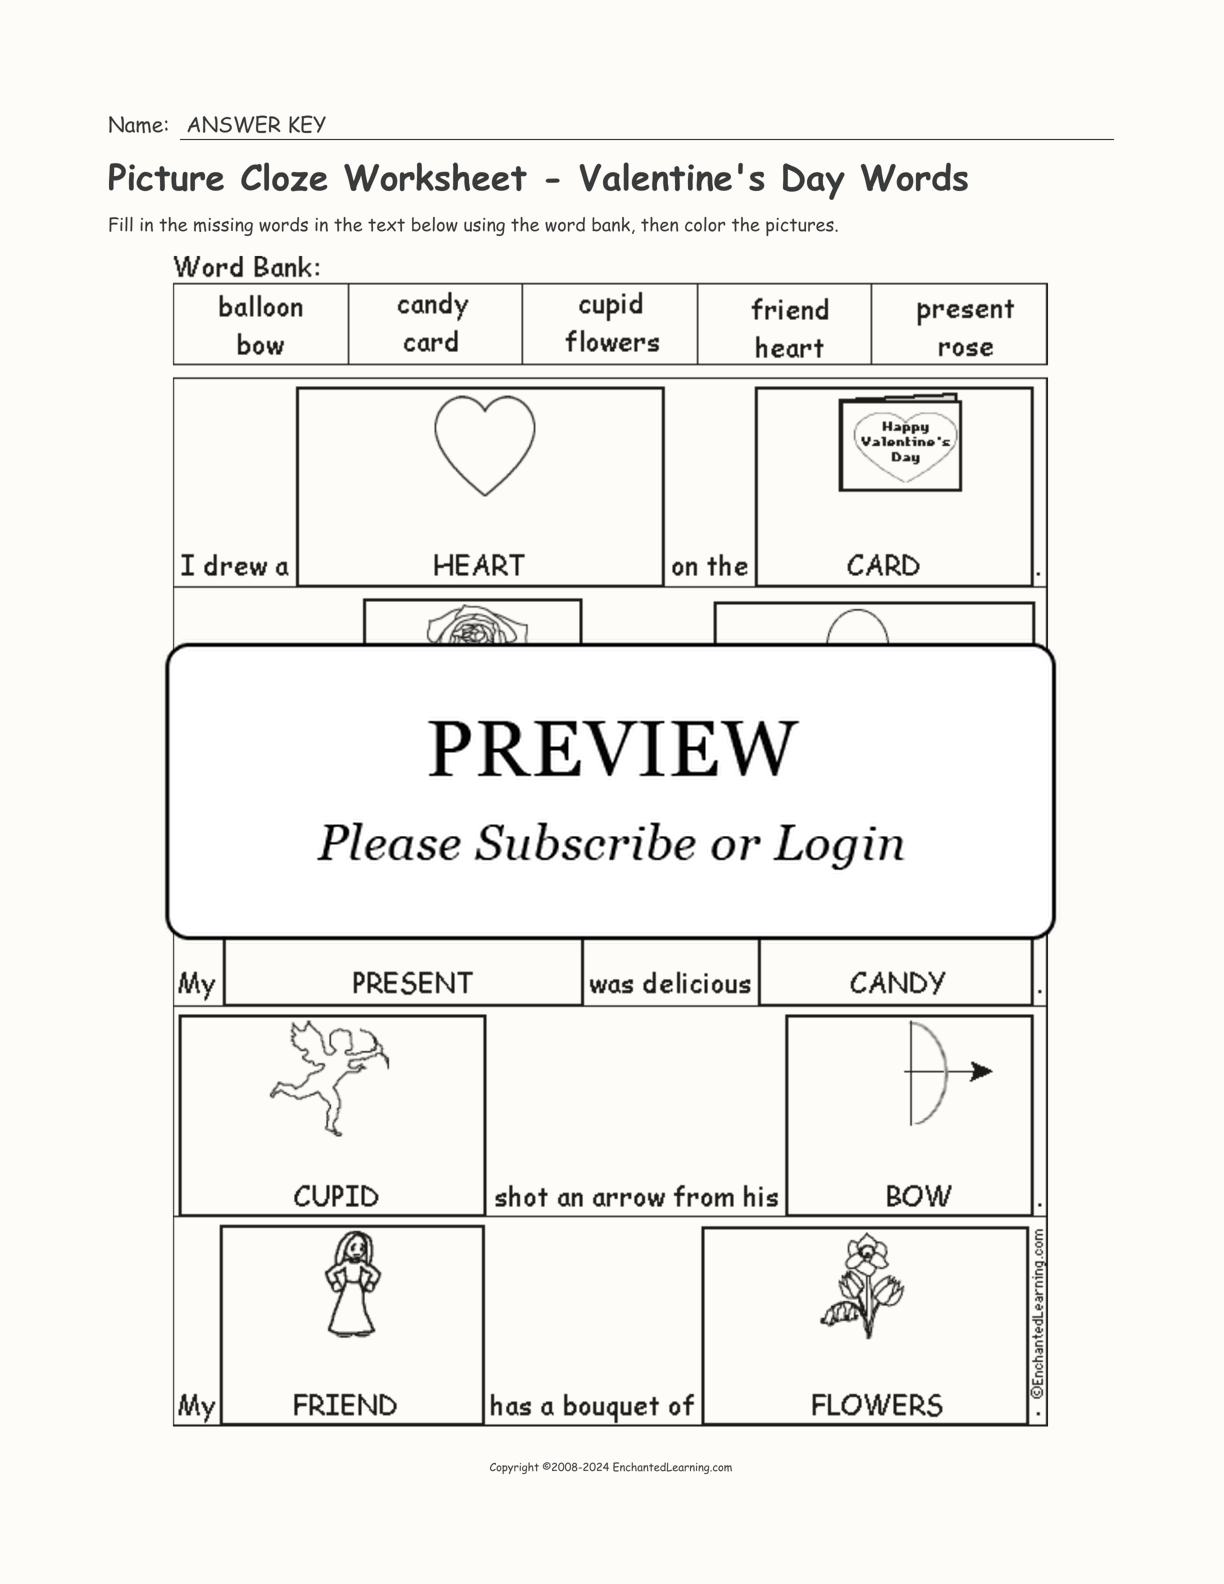 Picture Cloze Worksheet - Valentine's Day Words interactive worksheet page 2